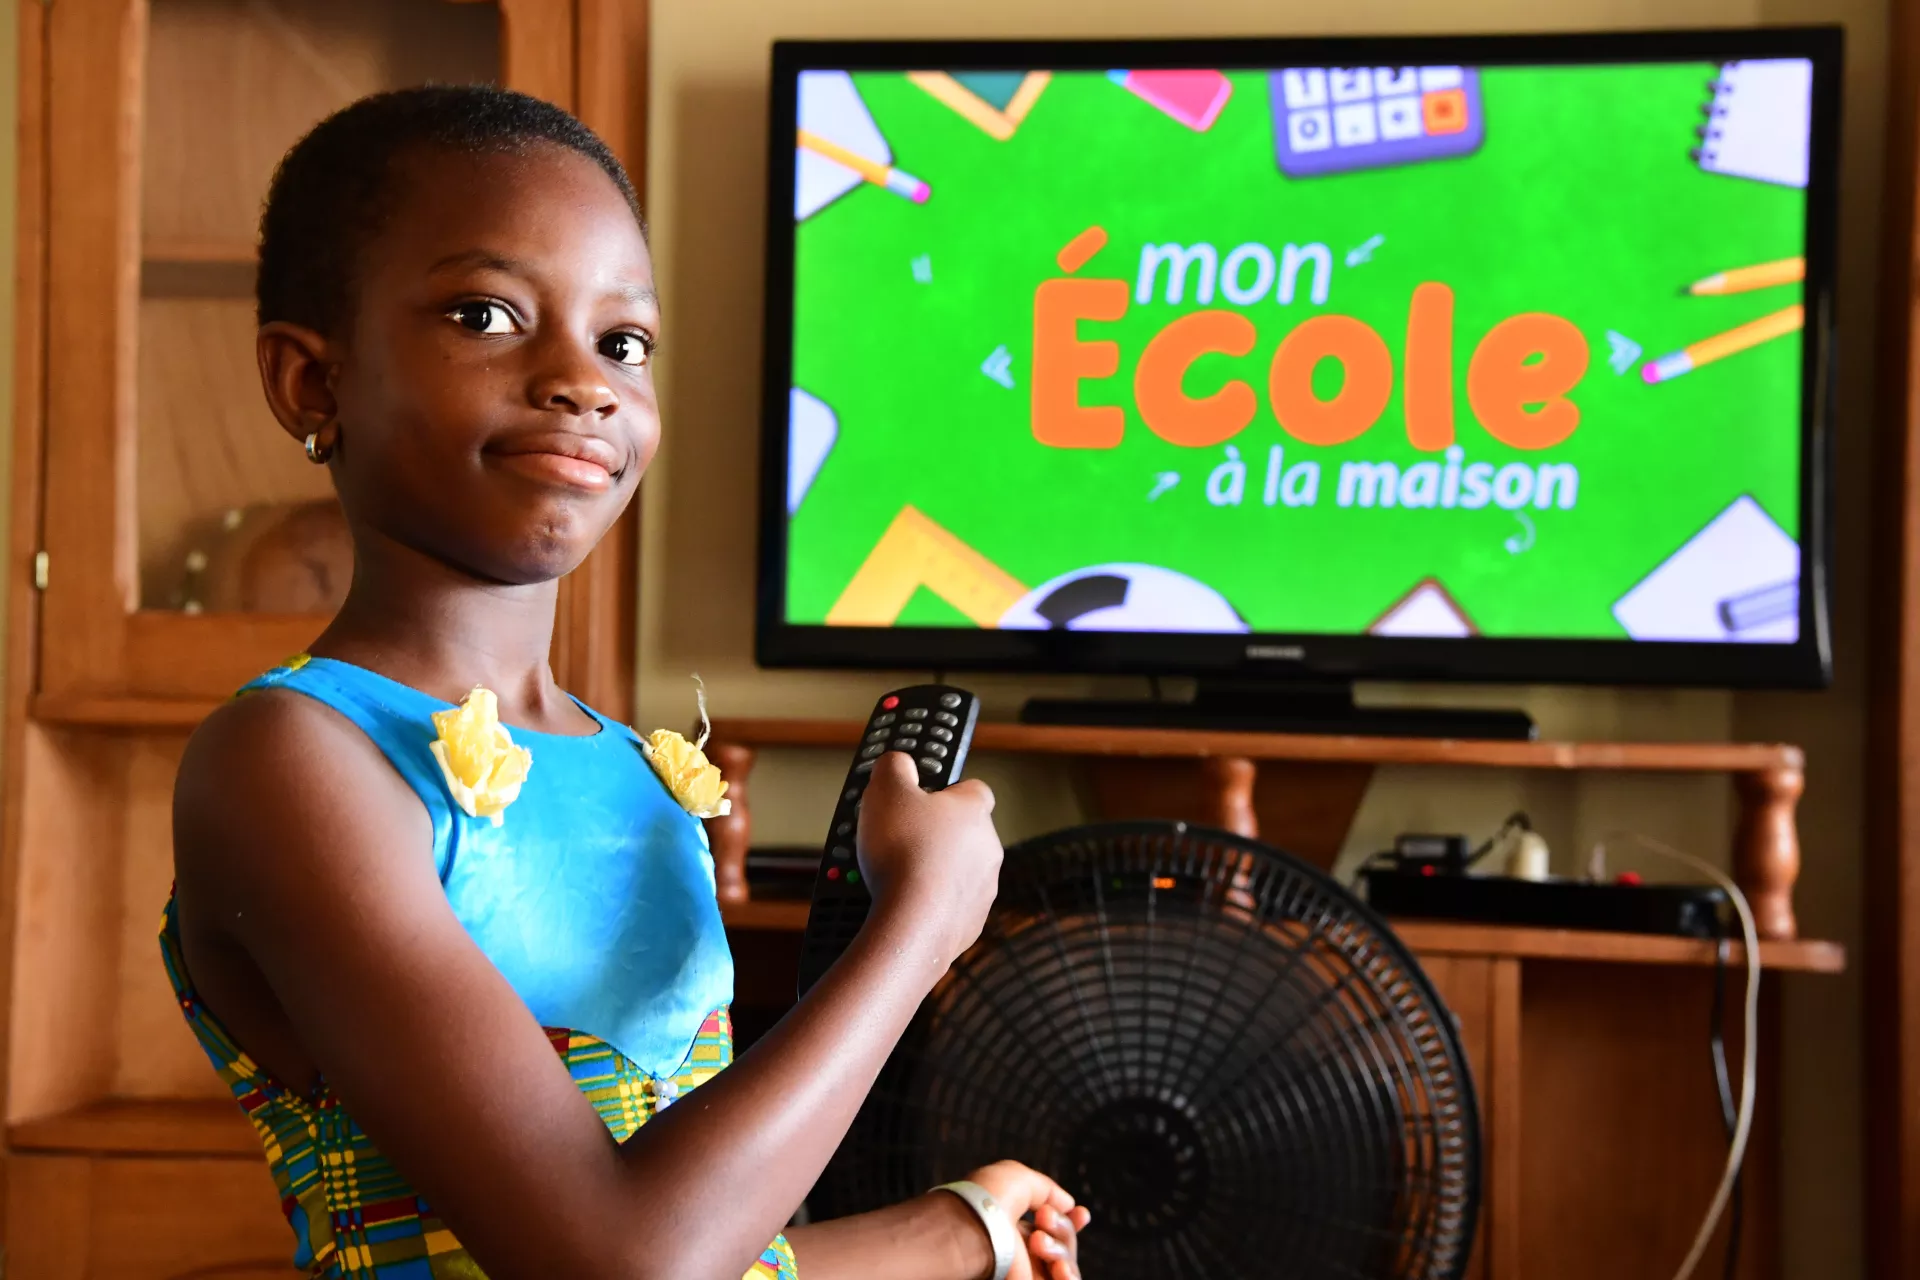 Côte d'Ivoire. A girl points at a TV screen.